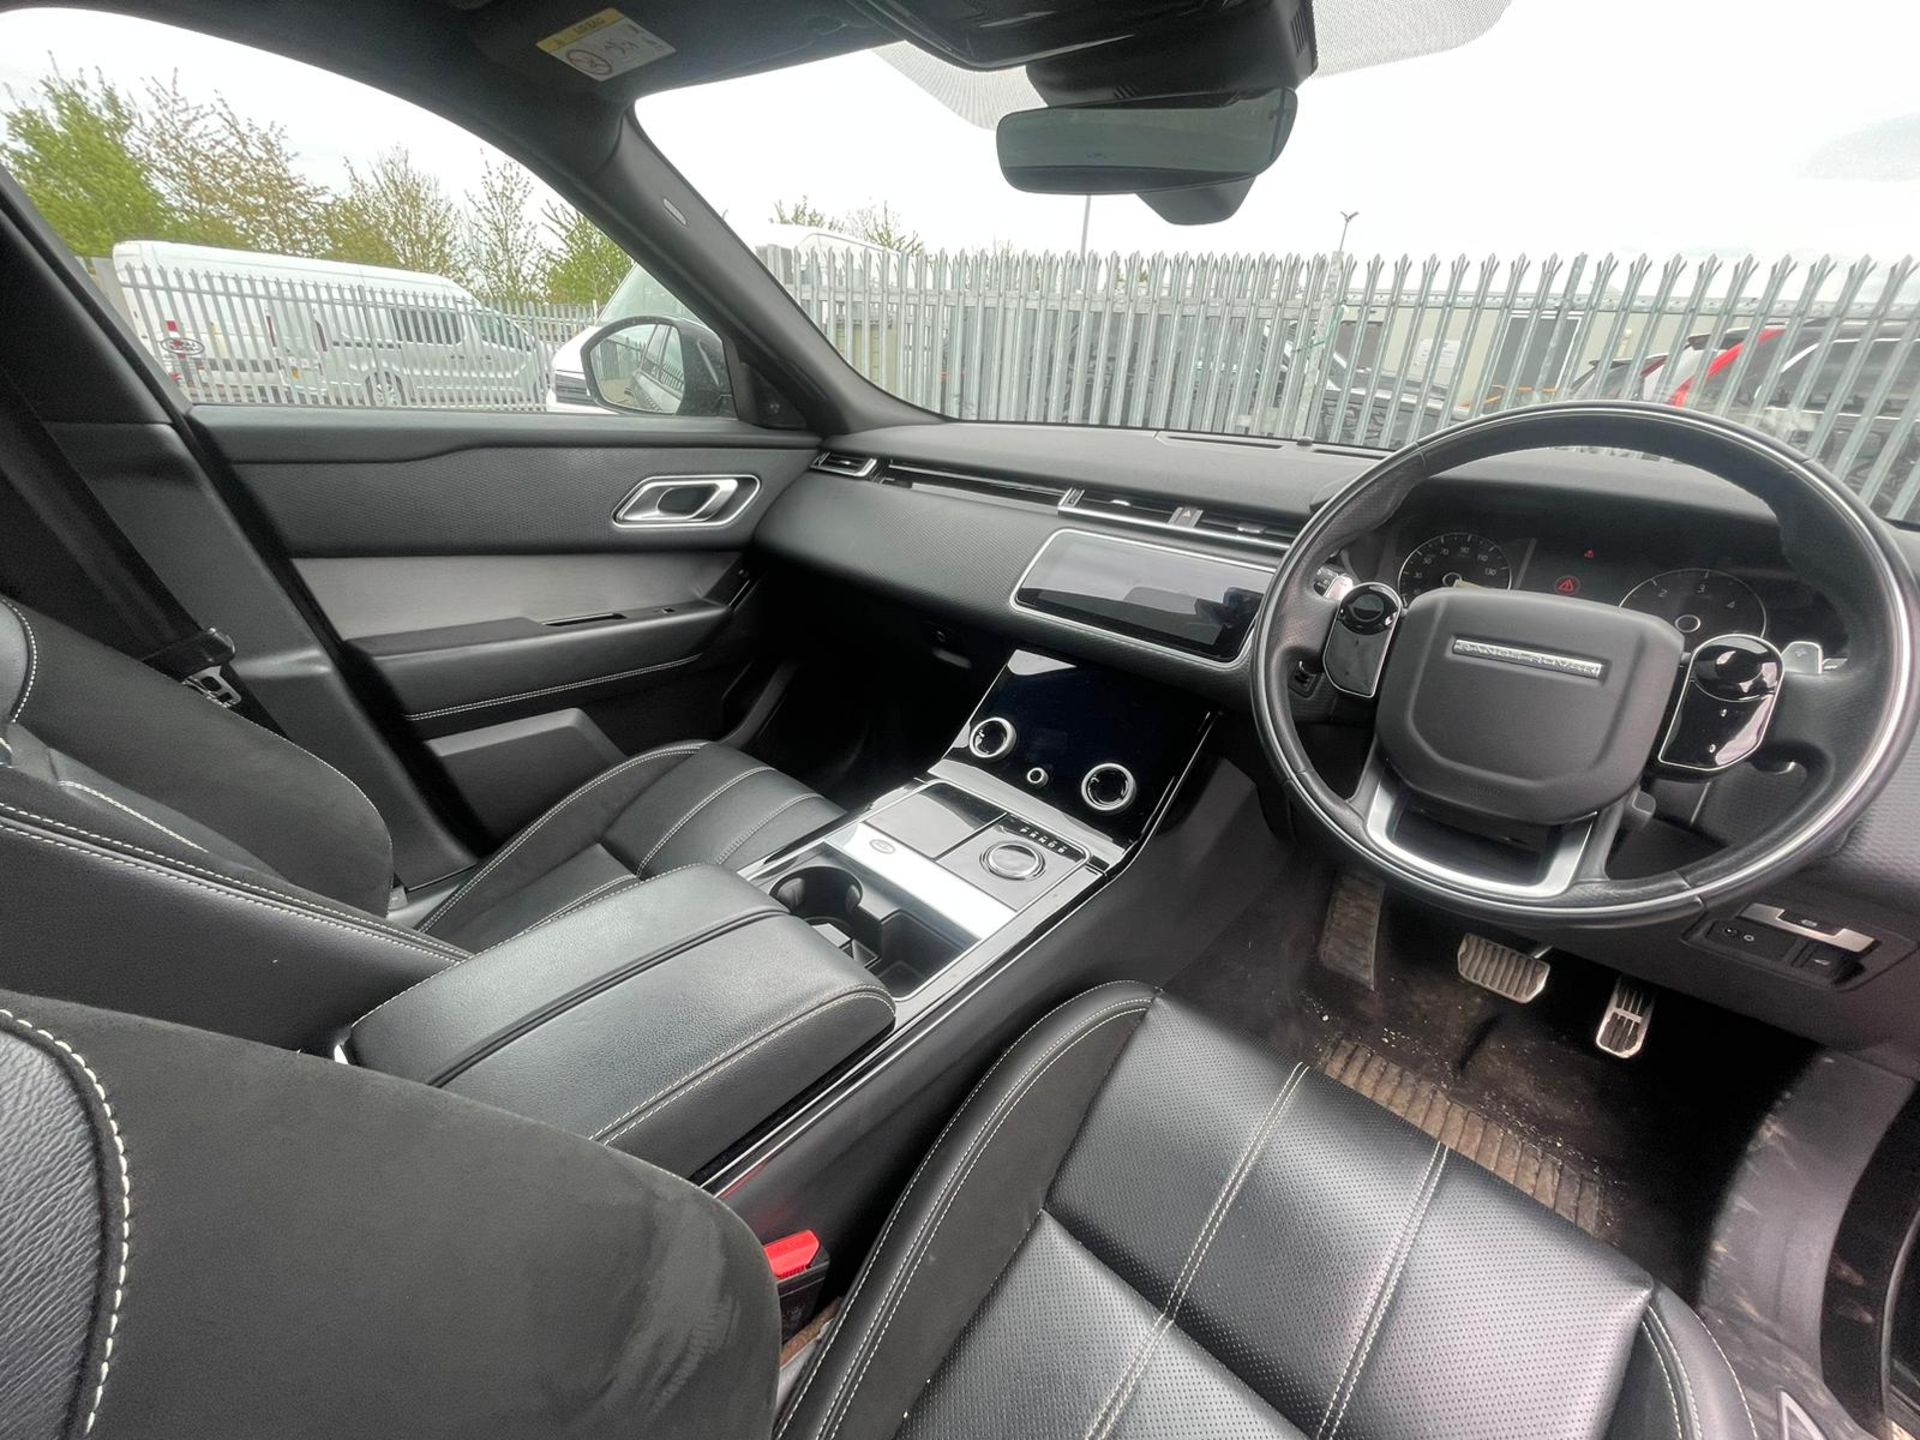 Land Rover Range Rover Velar 2.0 D240 R-Dynamic S 2018 '18 Reg' 4WD - Panoramic Roof- ULEZ Compliant - Image 16 of 33